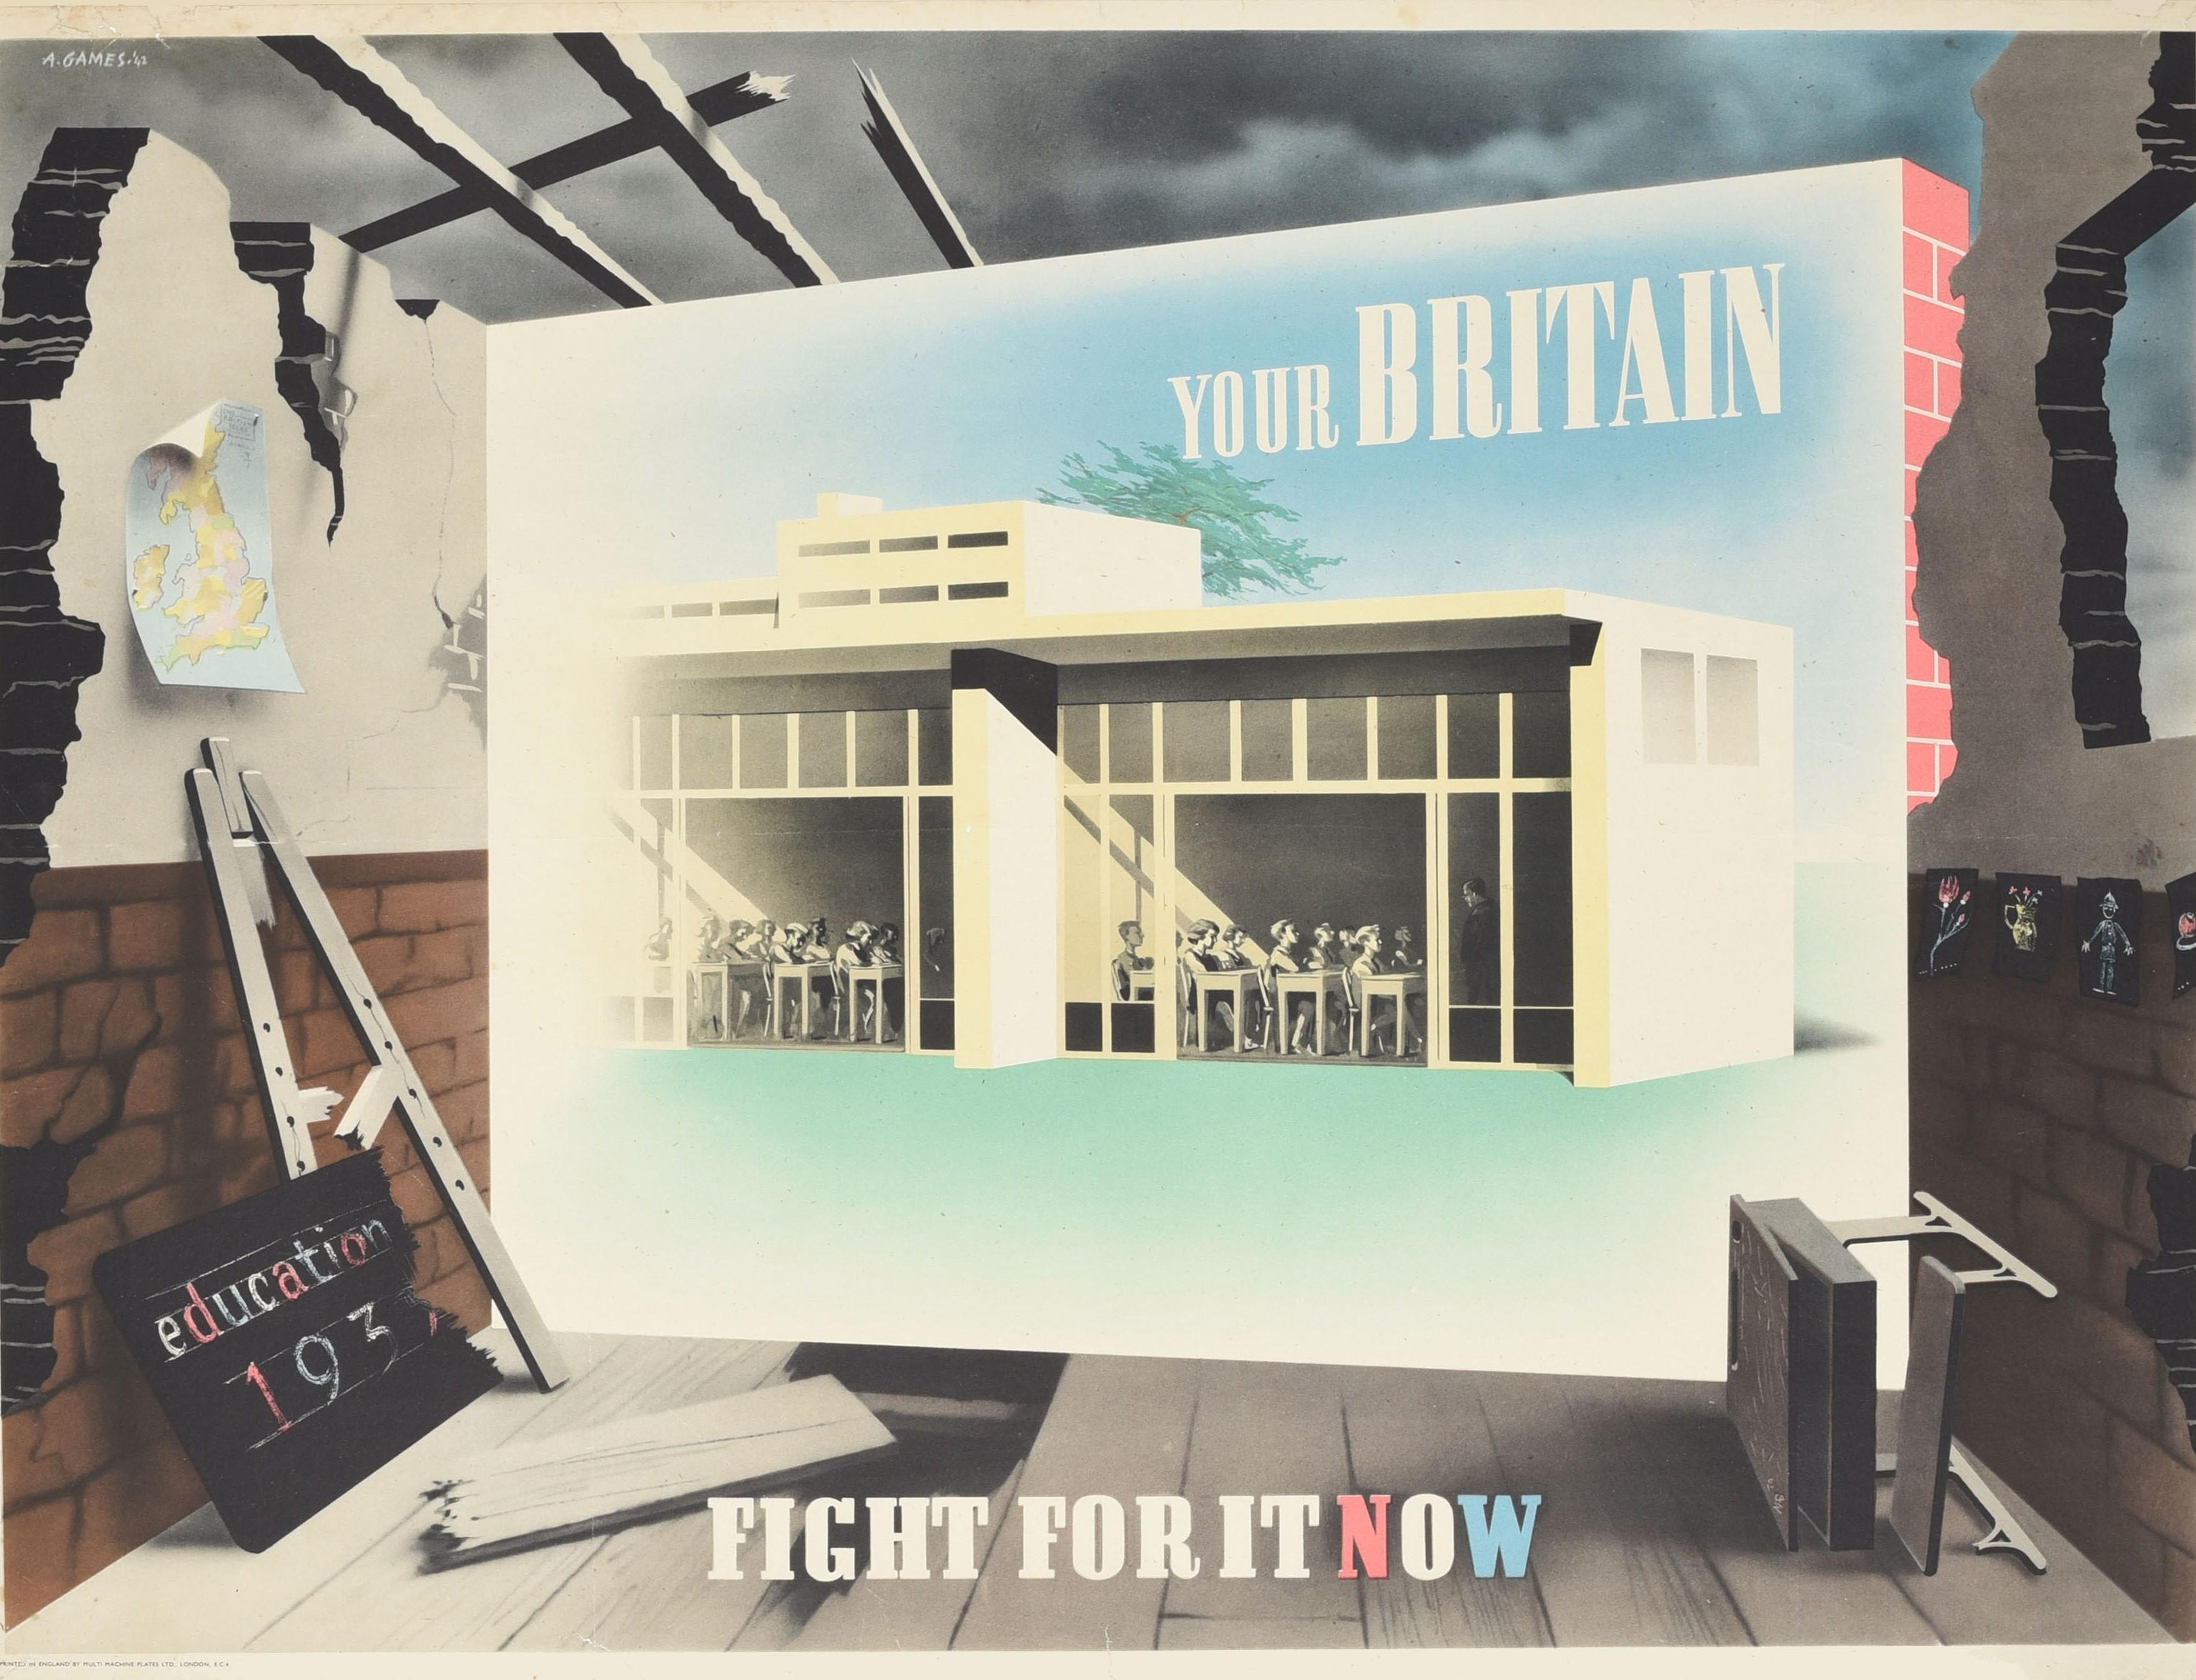 Original vintage World War Two poster - Your Britain Fight For It Now - featuring a great design by the notable British graphic designer Abram Games (Abraham Gamse; 1914-1996) depicting a dark illustration of a bombed out street in ruins with a